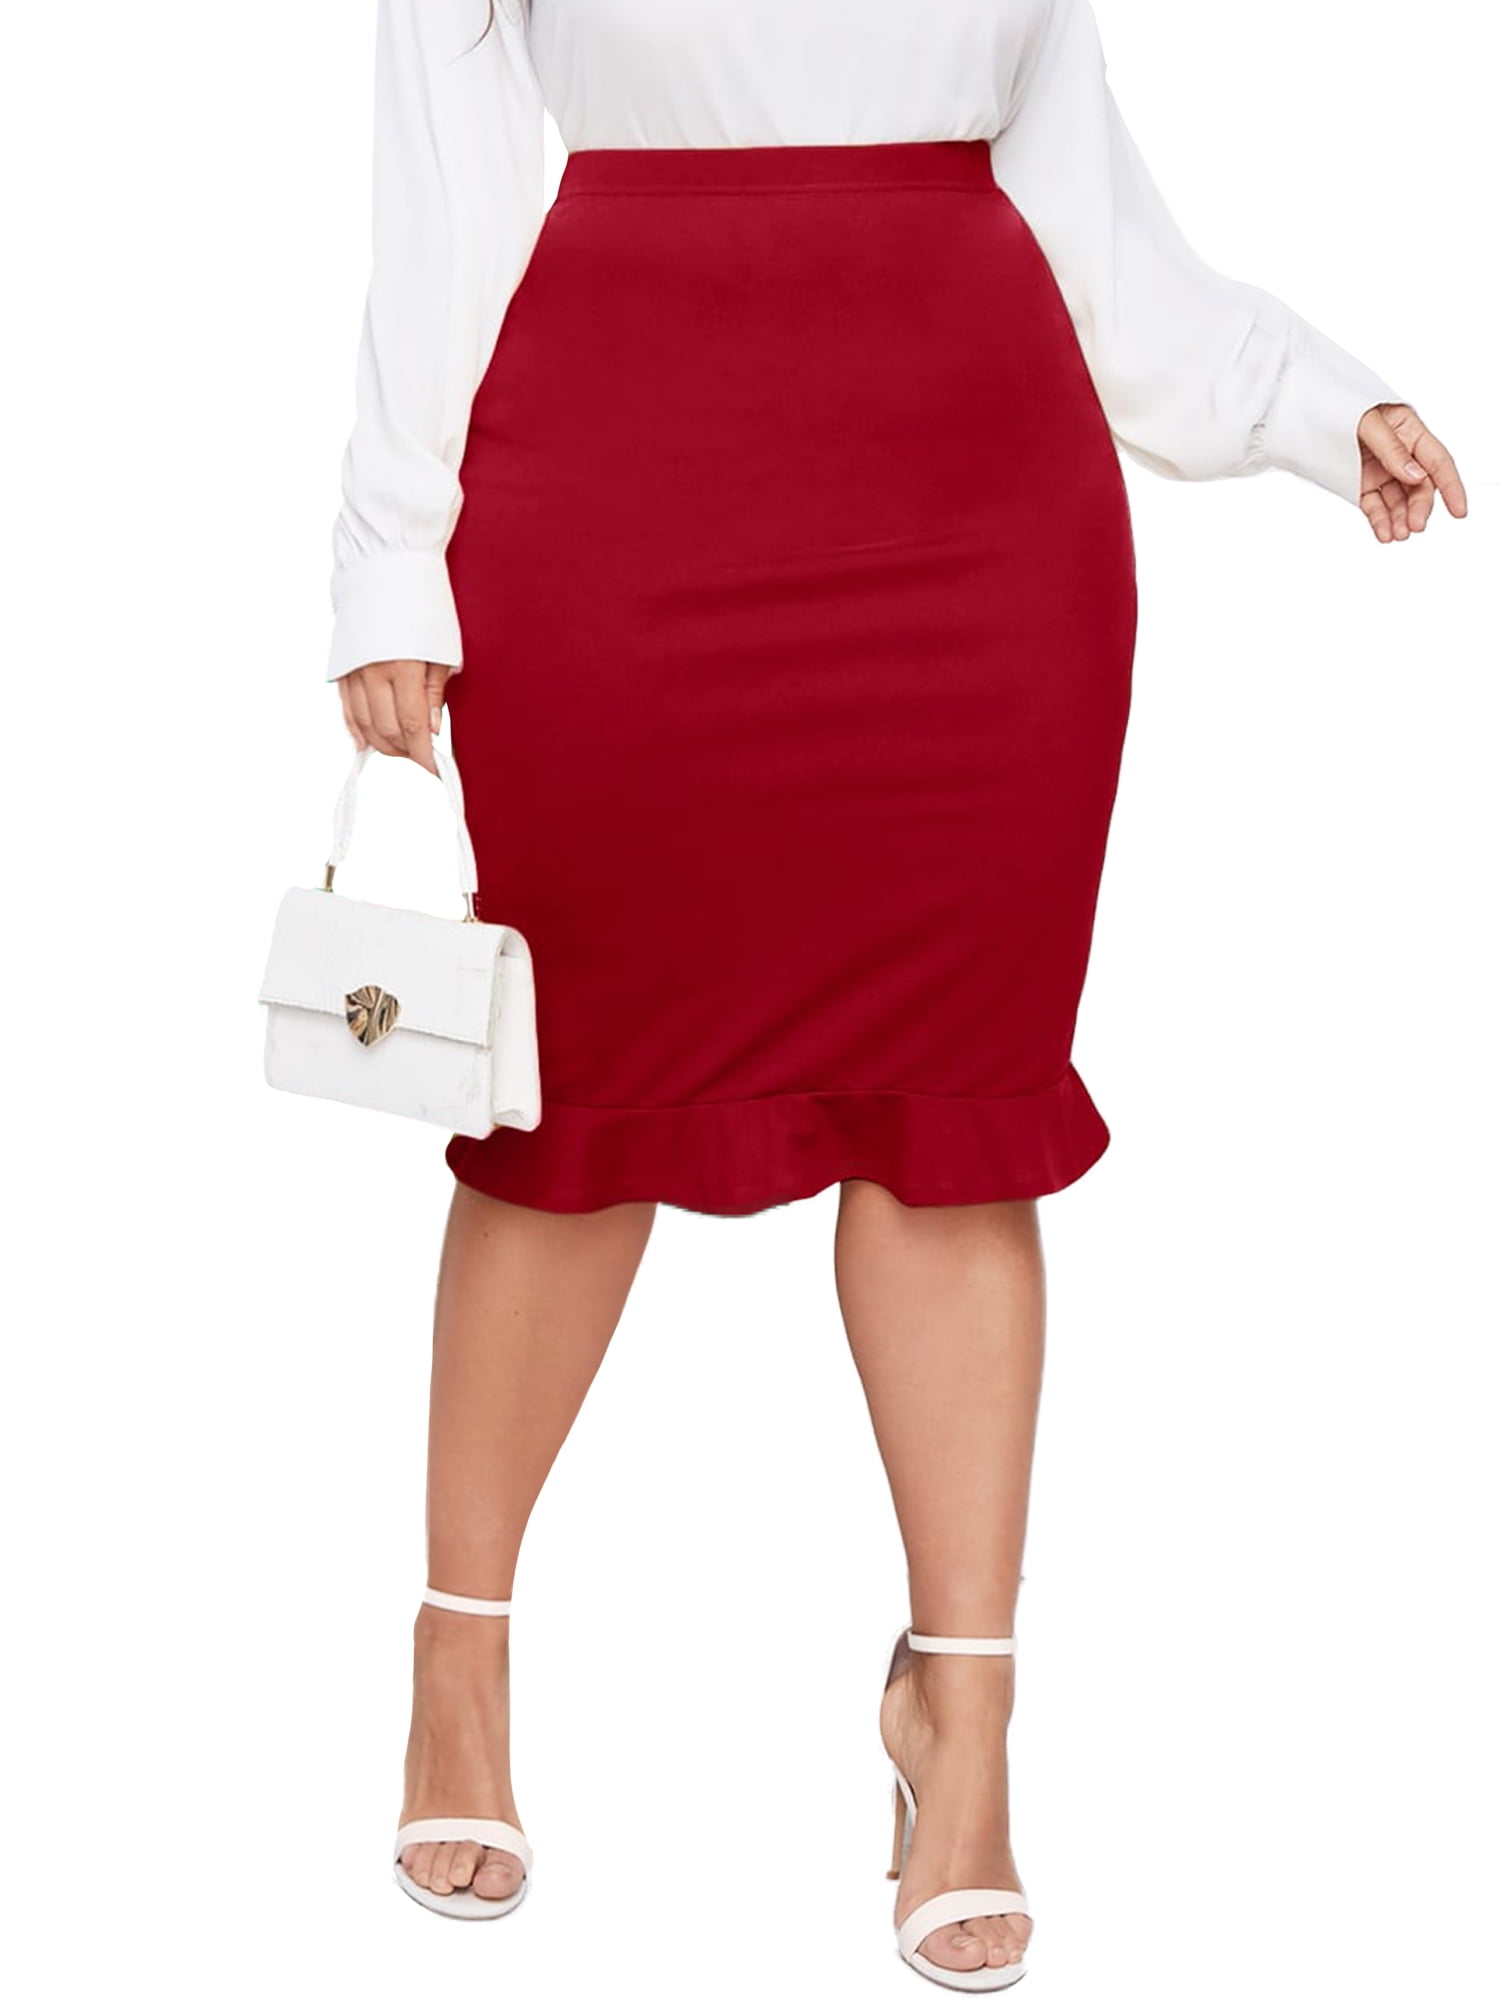 Poseshe Womens Plus Size Pencil Skirt For Work Black Office Skirts For Women Fashion Ruffle